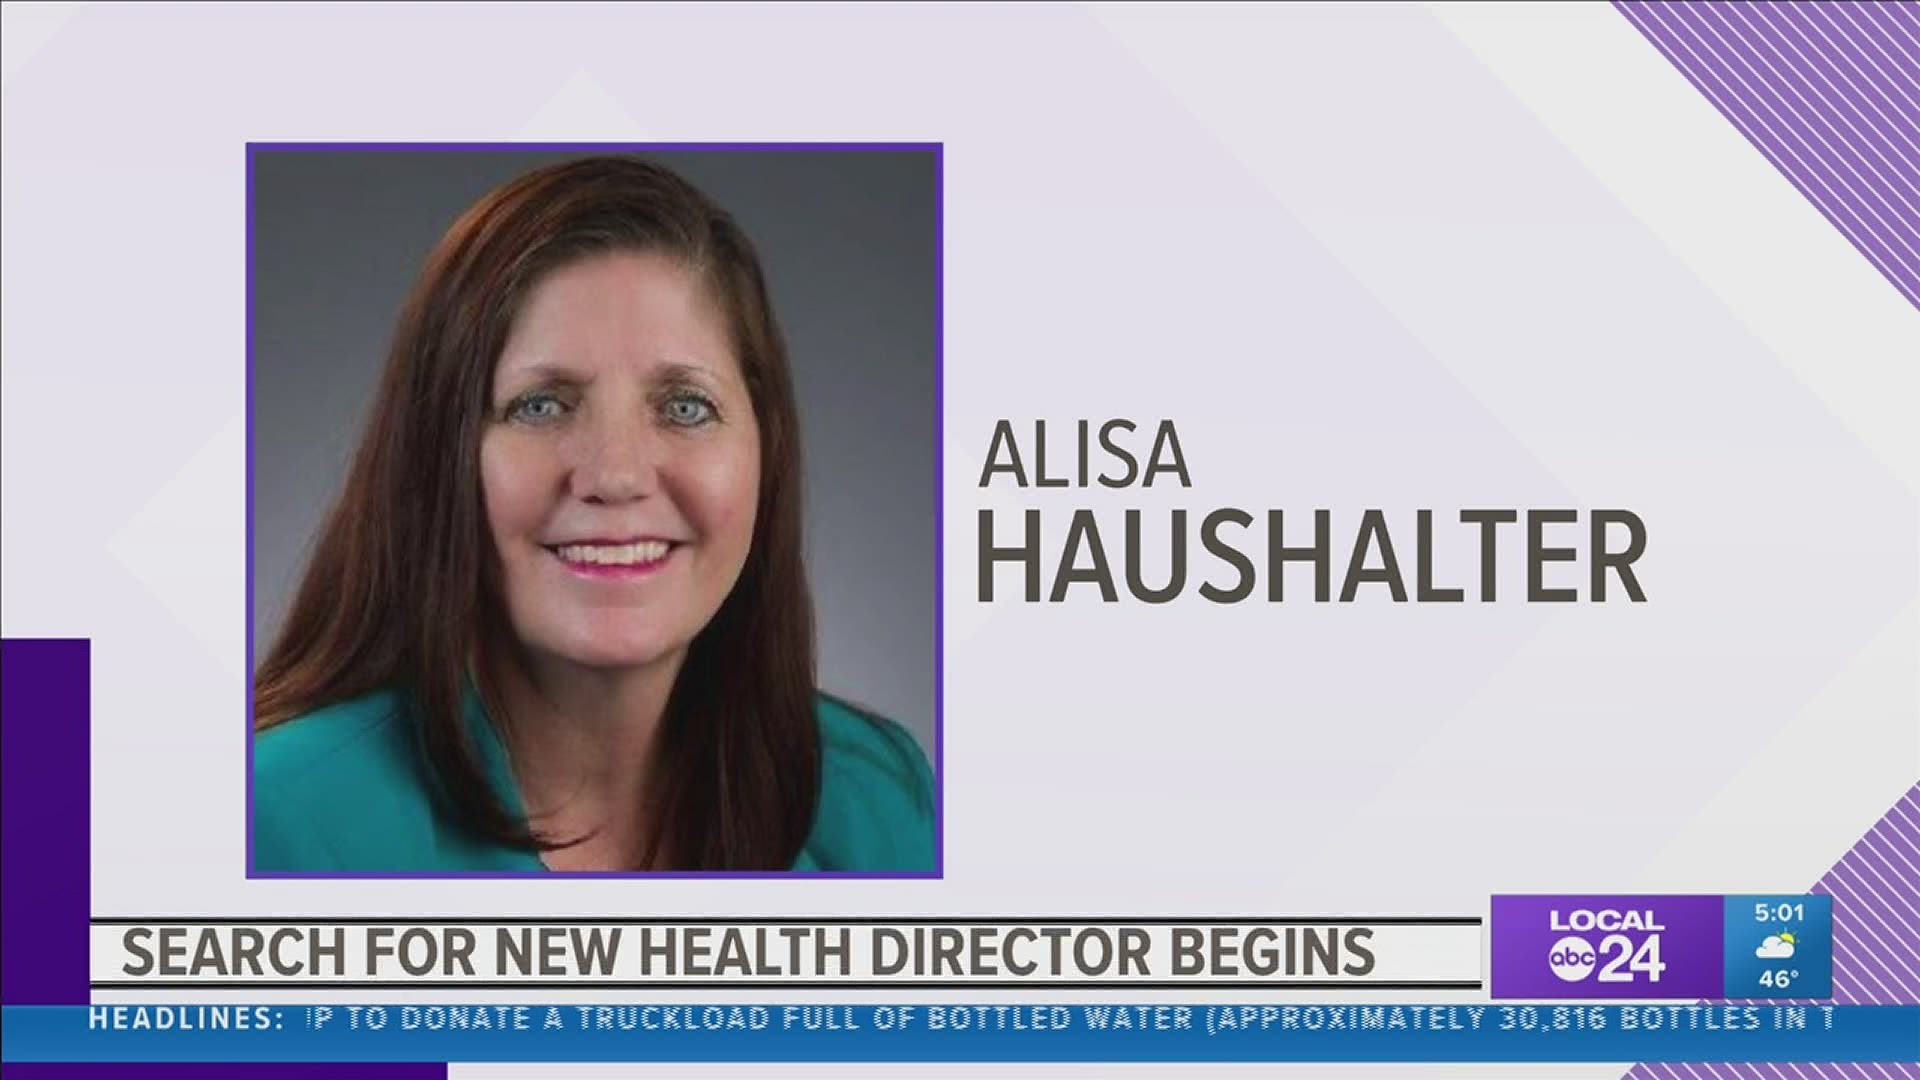 This comes after Dr. Alisa Haushalter resigned following an investigation into COVID-19 vaccine mismanagement.